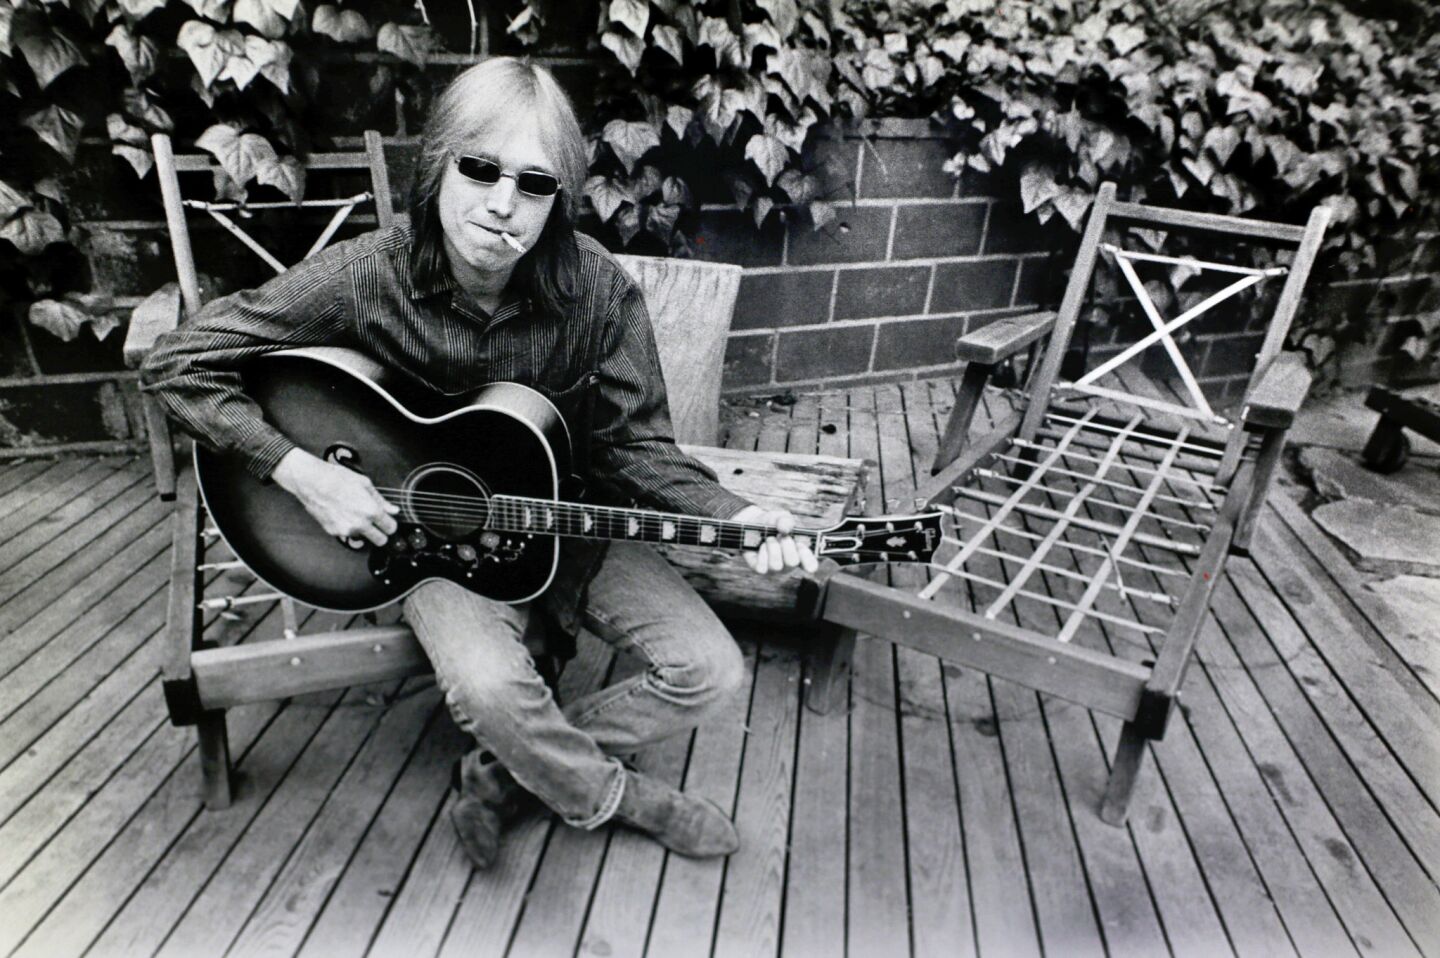 Tom Petty at his home on April 28, 1985.